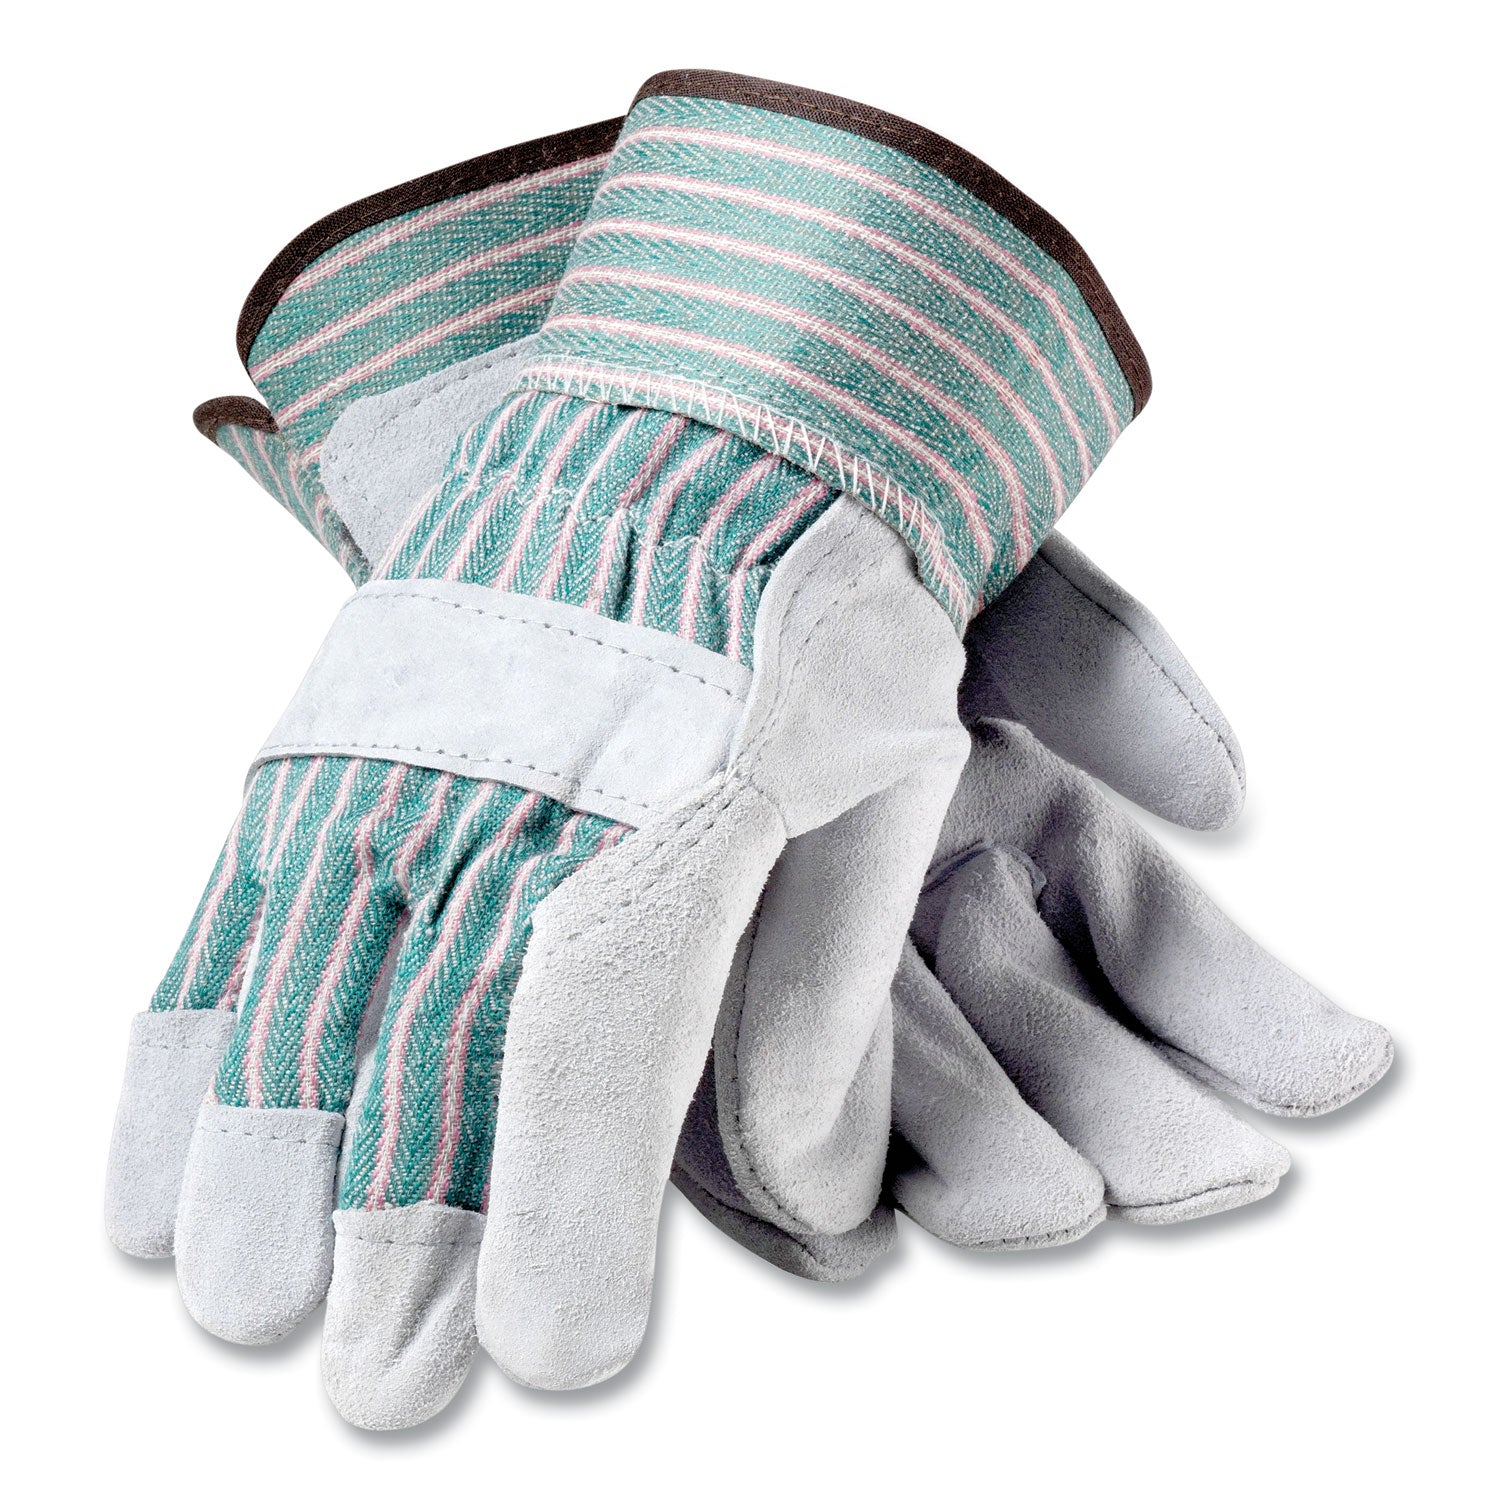 bronze-series-leather-fabric-work-gloves-small-size-7-gray-green-12-pairs_pid836563s - 1